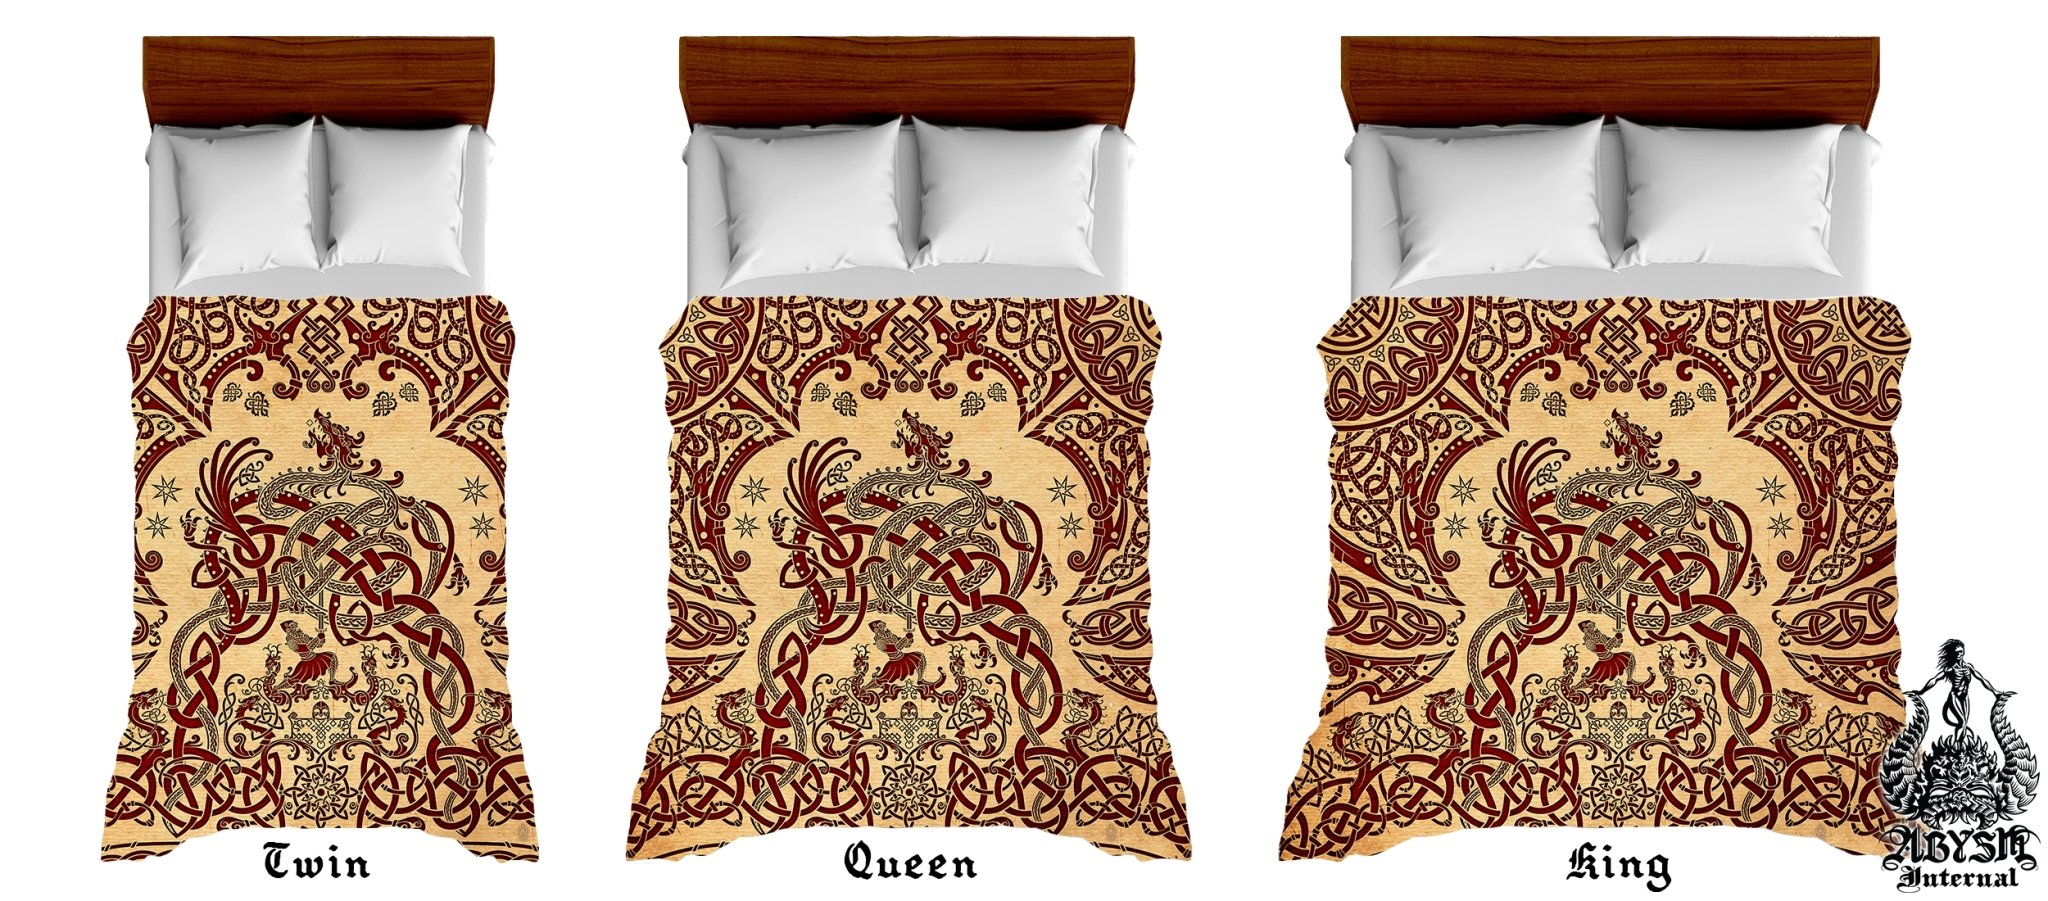 Viking Bedding Set, Comforter and Duvet, Norse Bed Cover and Bedroom Decor, Nordic Art, Sigurd kills Dragon Fafnir, King, Queen and Twin Size - Paper - Abysm Internal